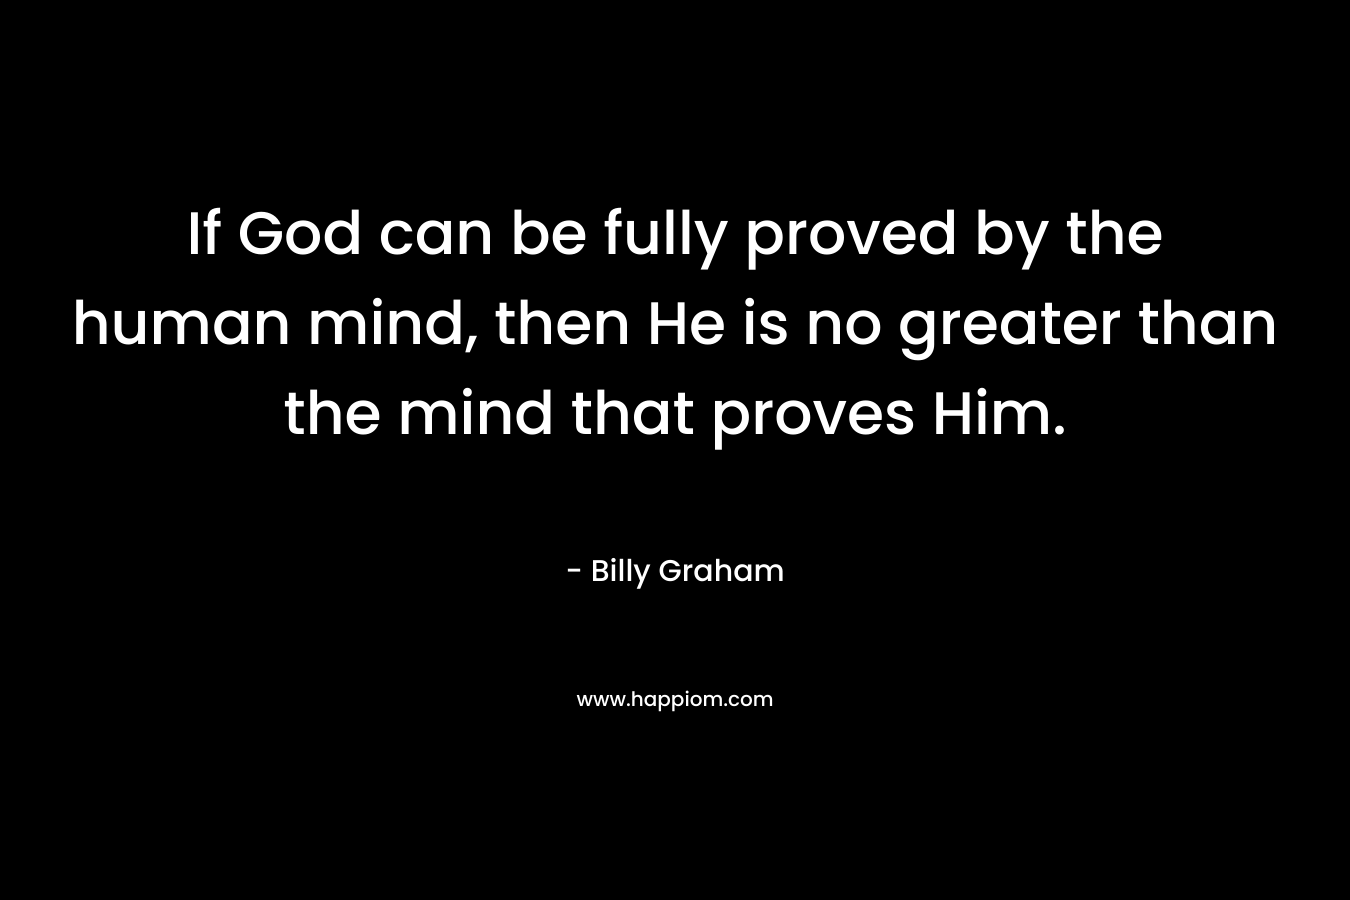 If God can be fully proved by the human mind, then He is no greater than the mind that proves Him.